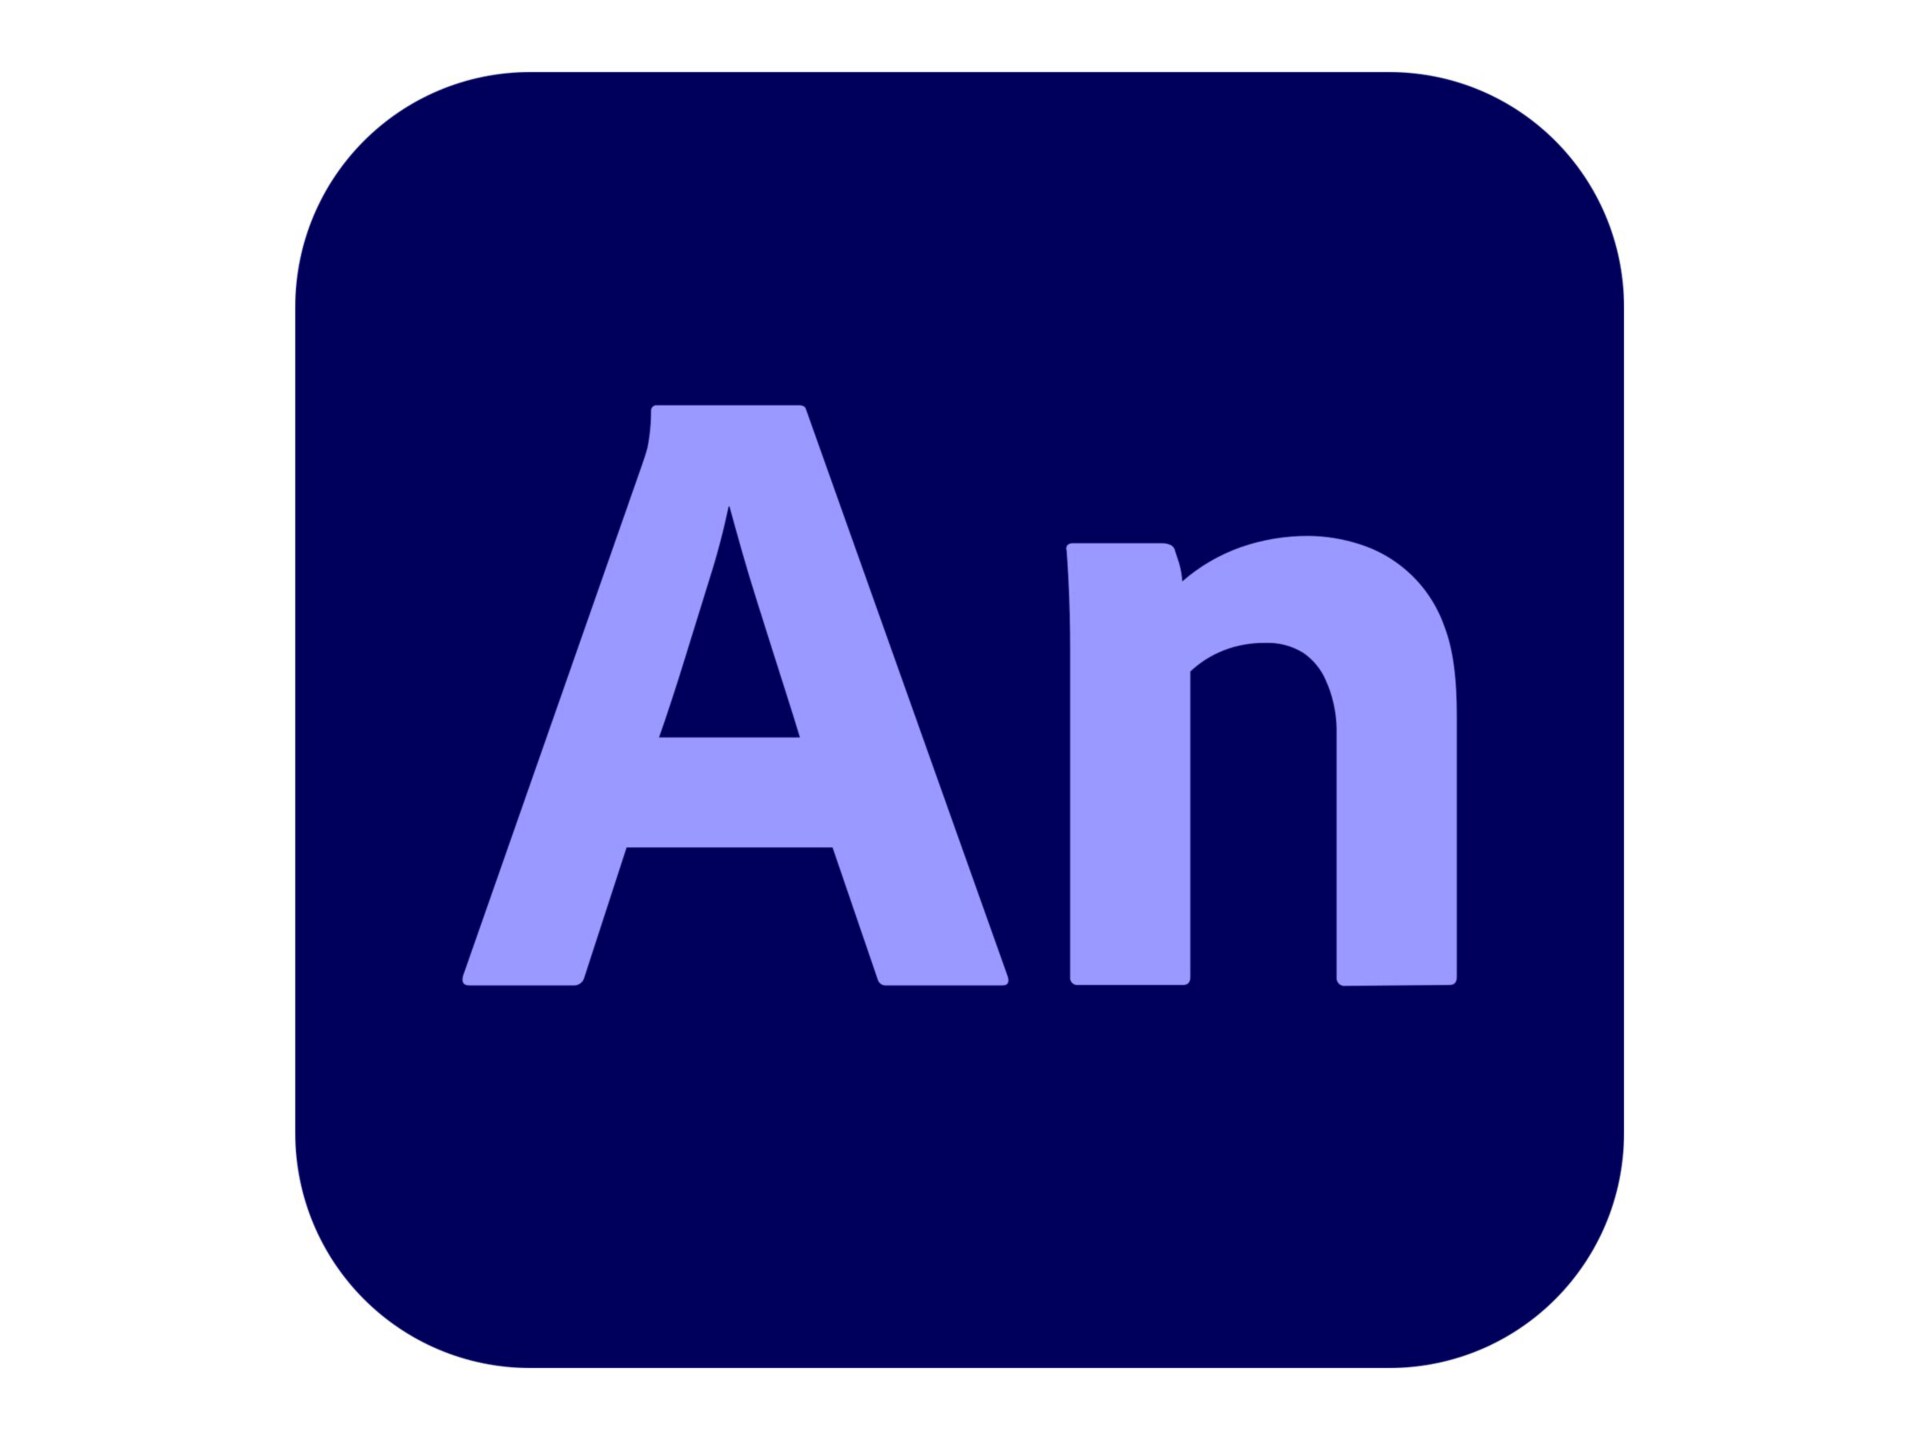 Adobe Animate CC for teams - Subscription New (13 months) - 1 named user